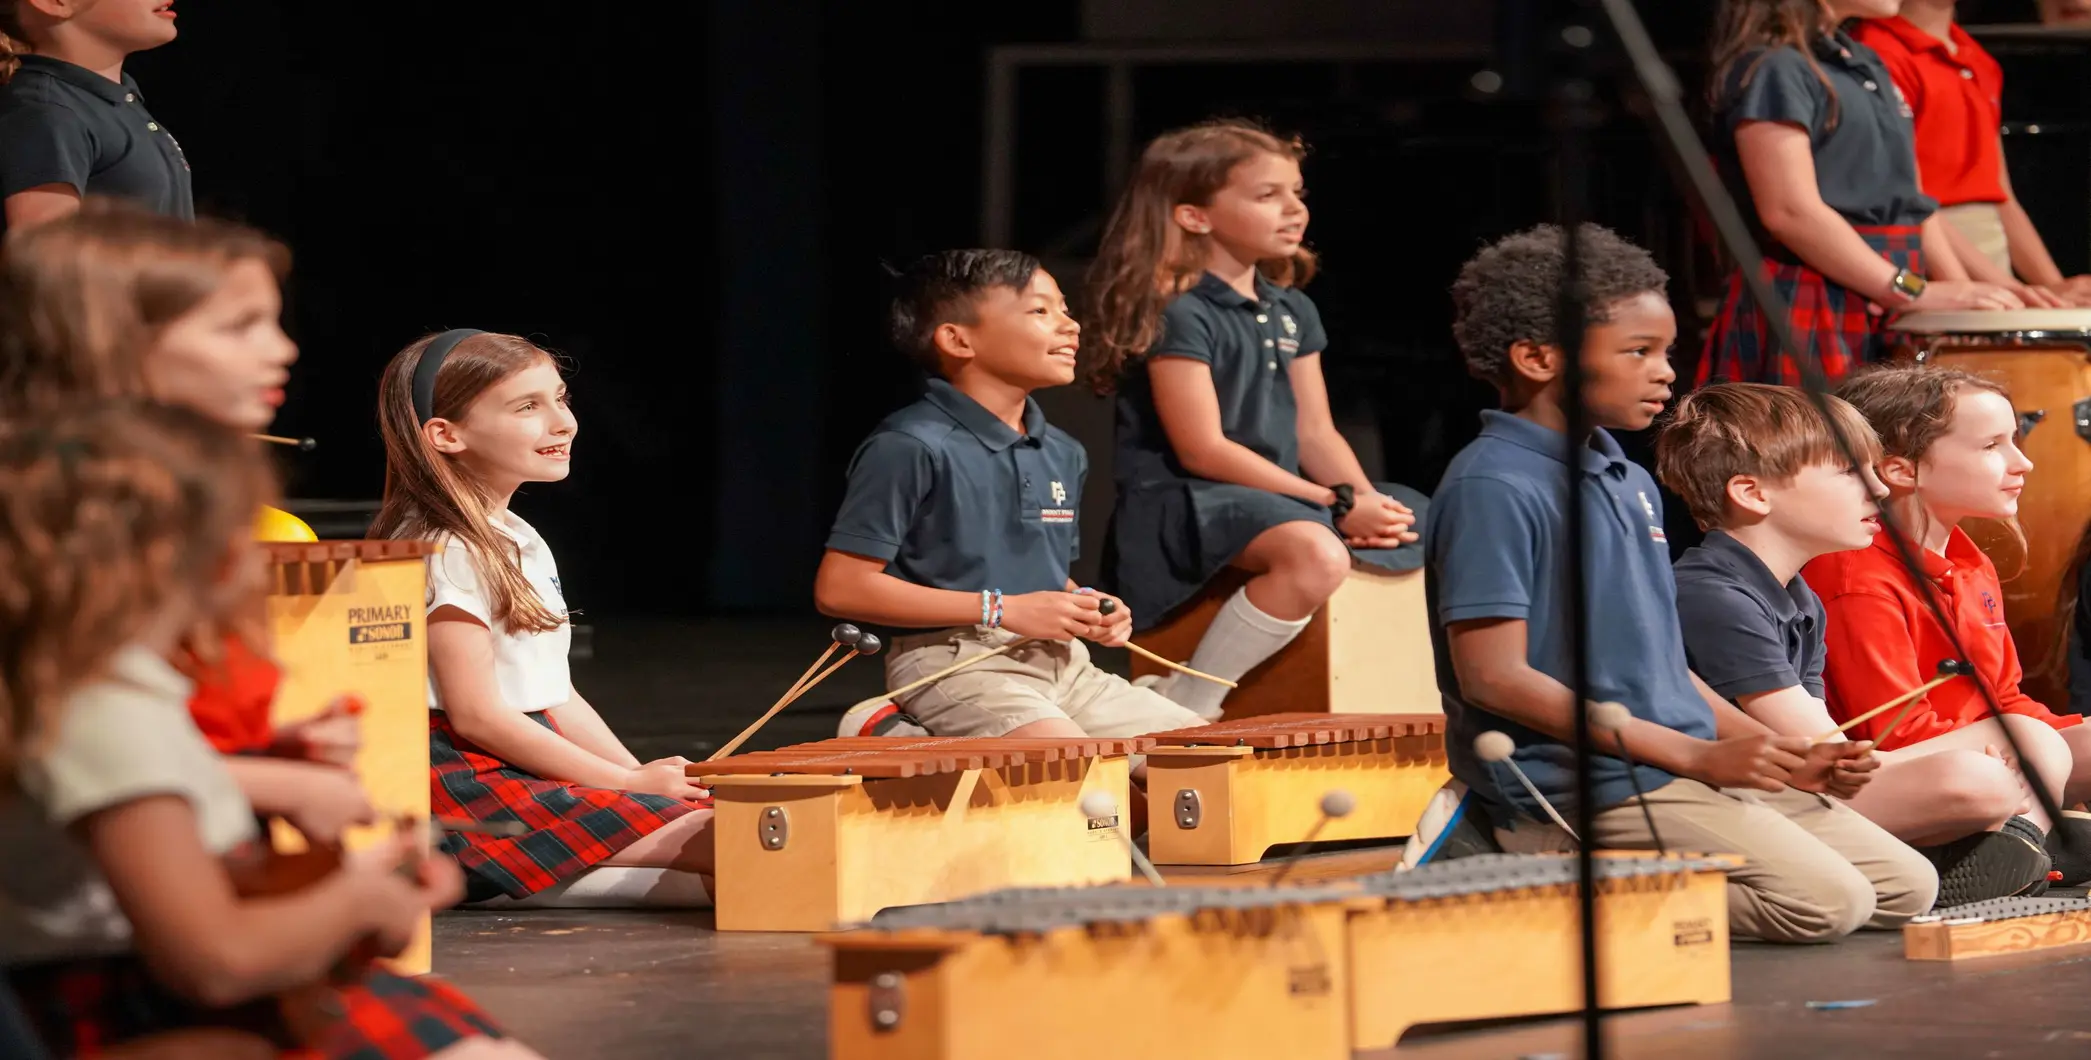 Children play xylophones on a stage